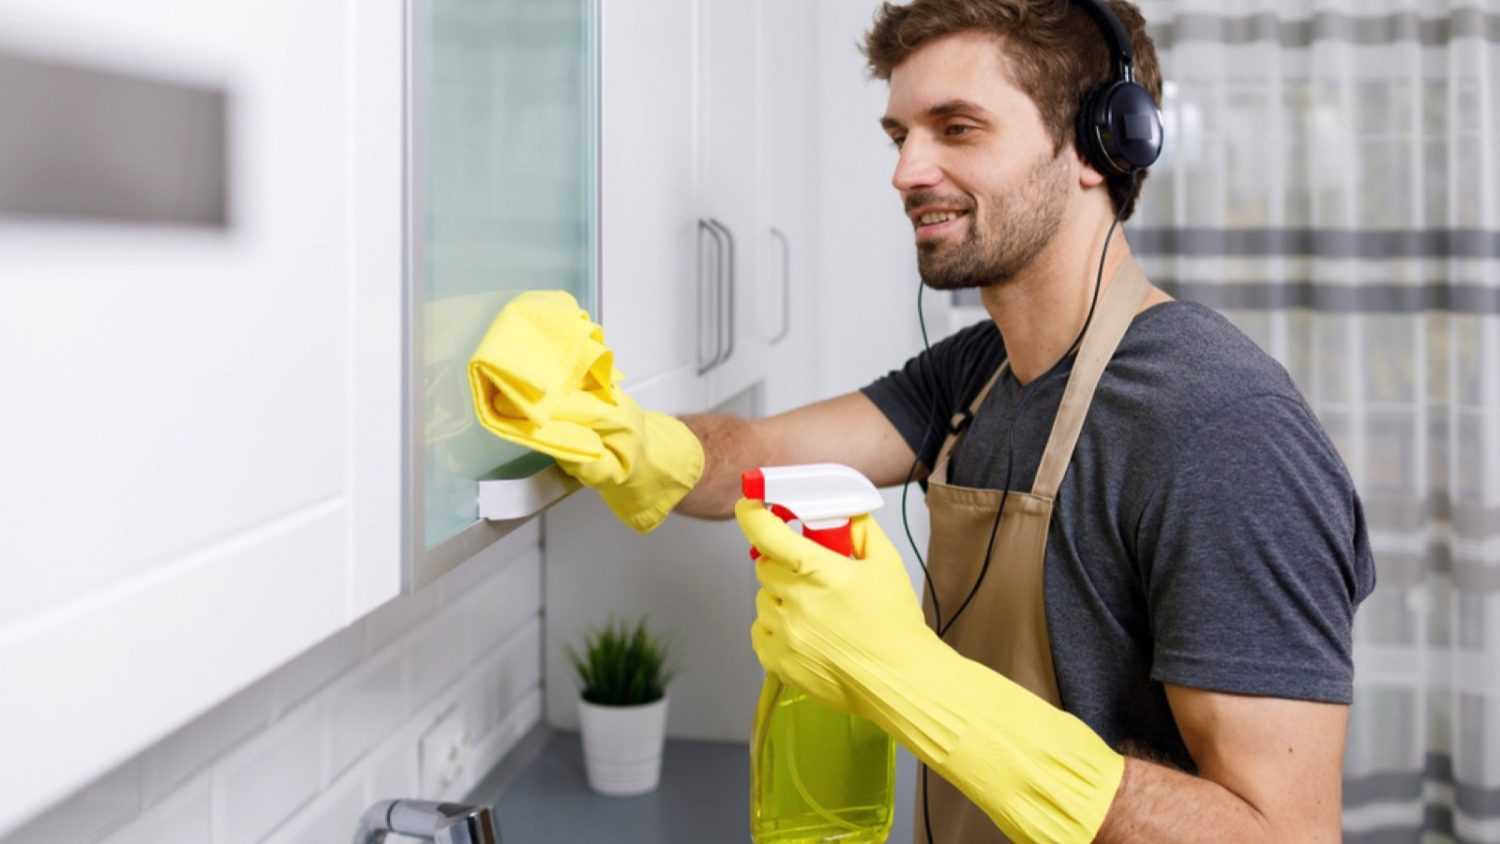 Man listening to music and dusting